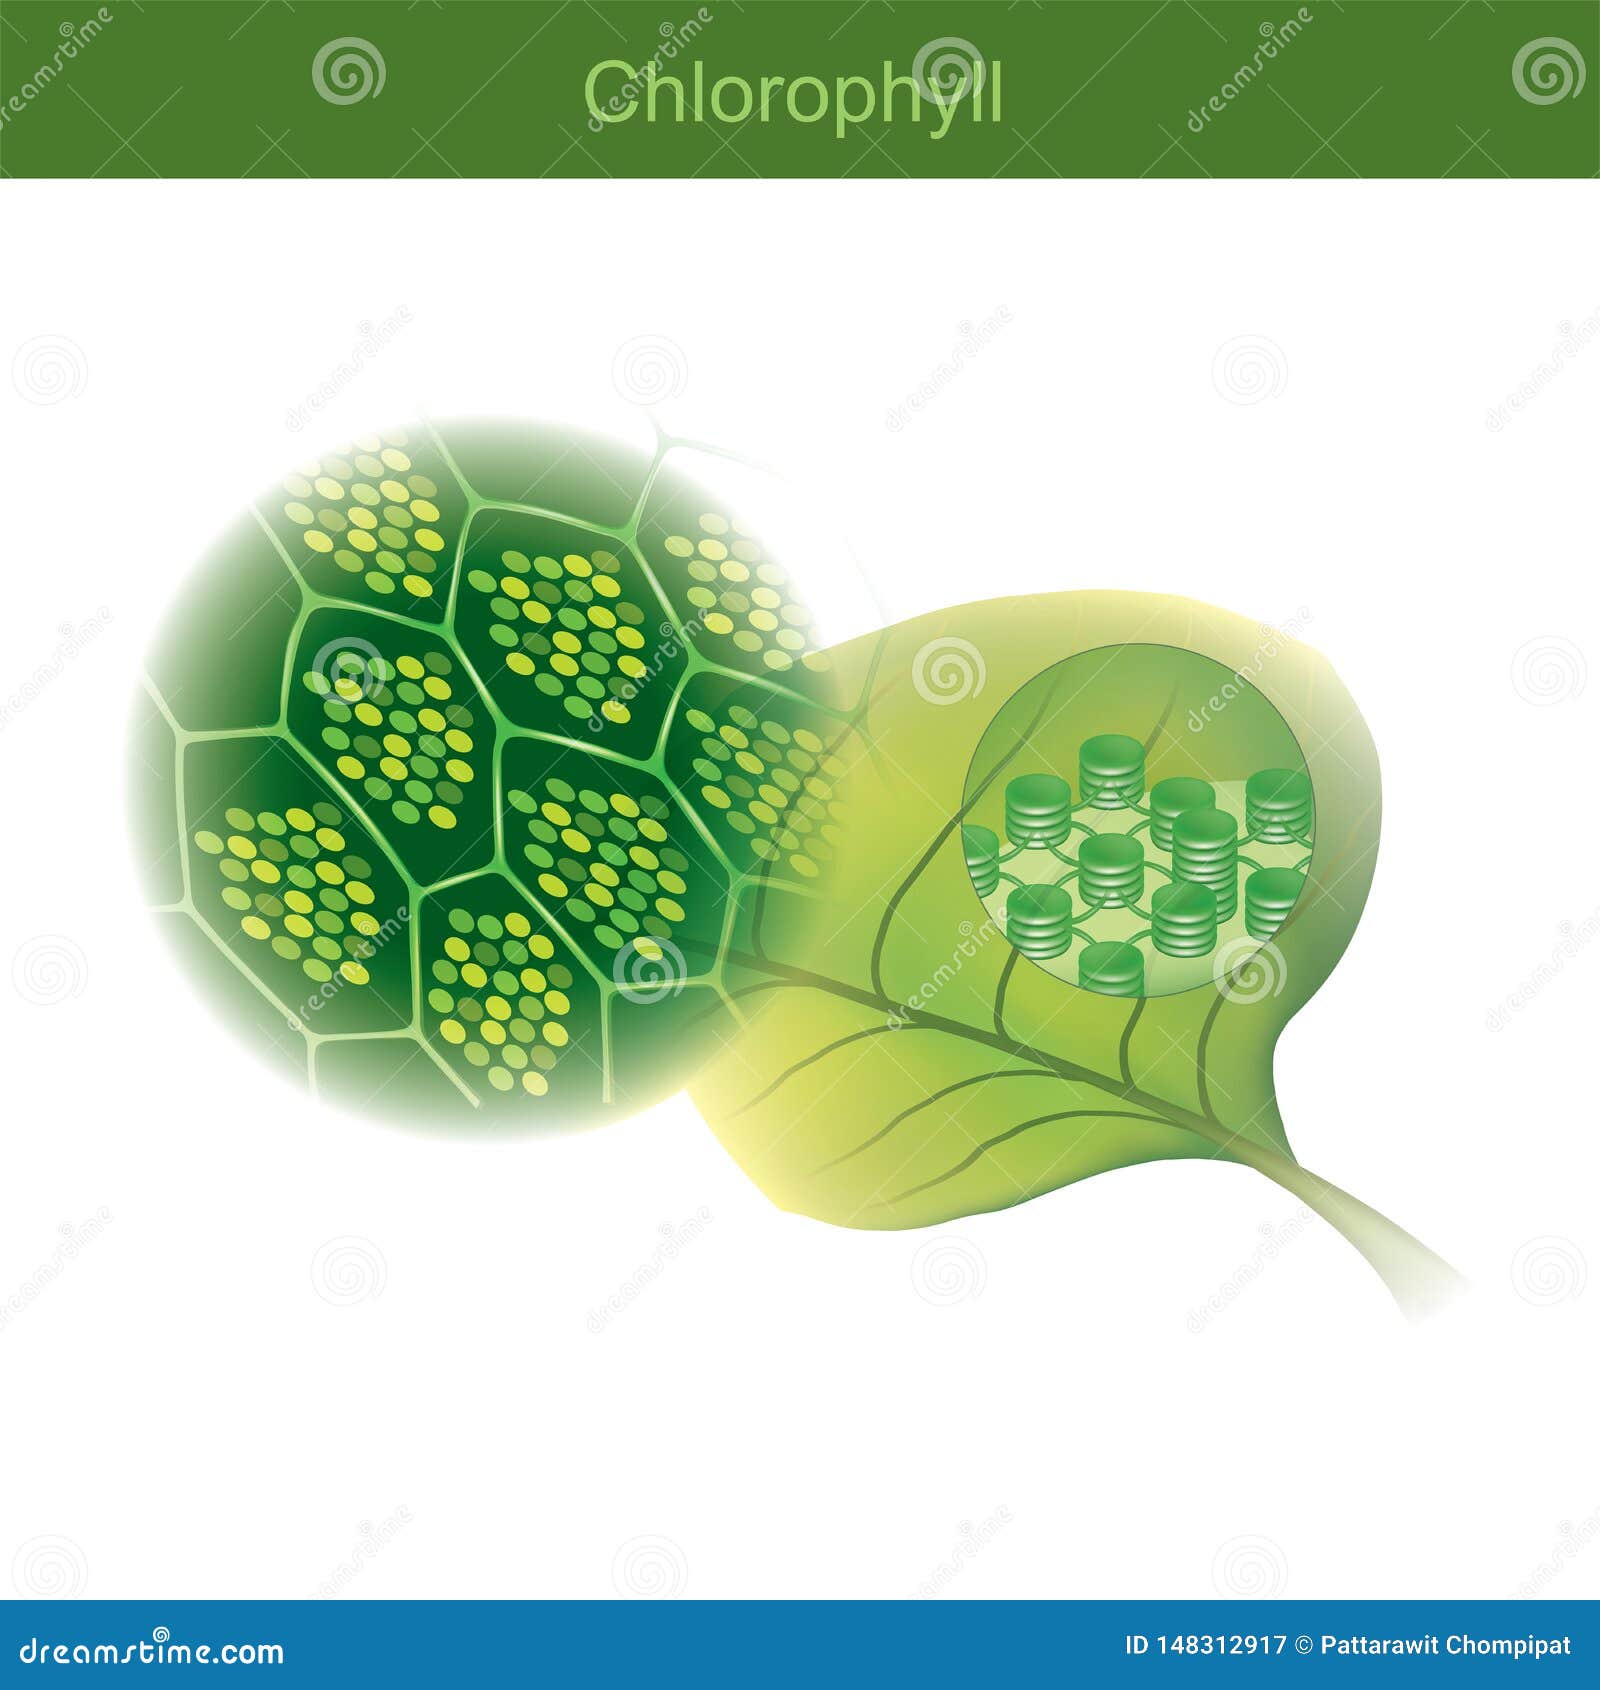 chlorophyll is a green photosynthetic pigment found in plants